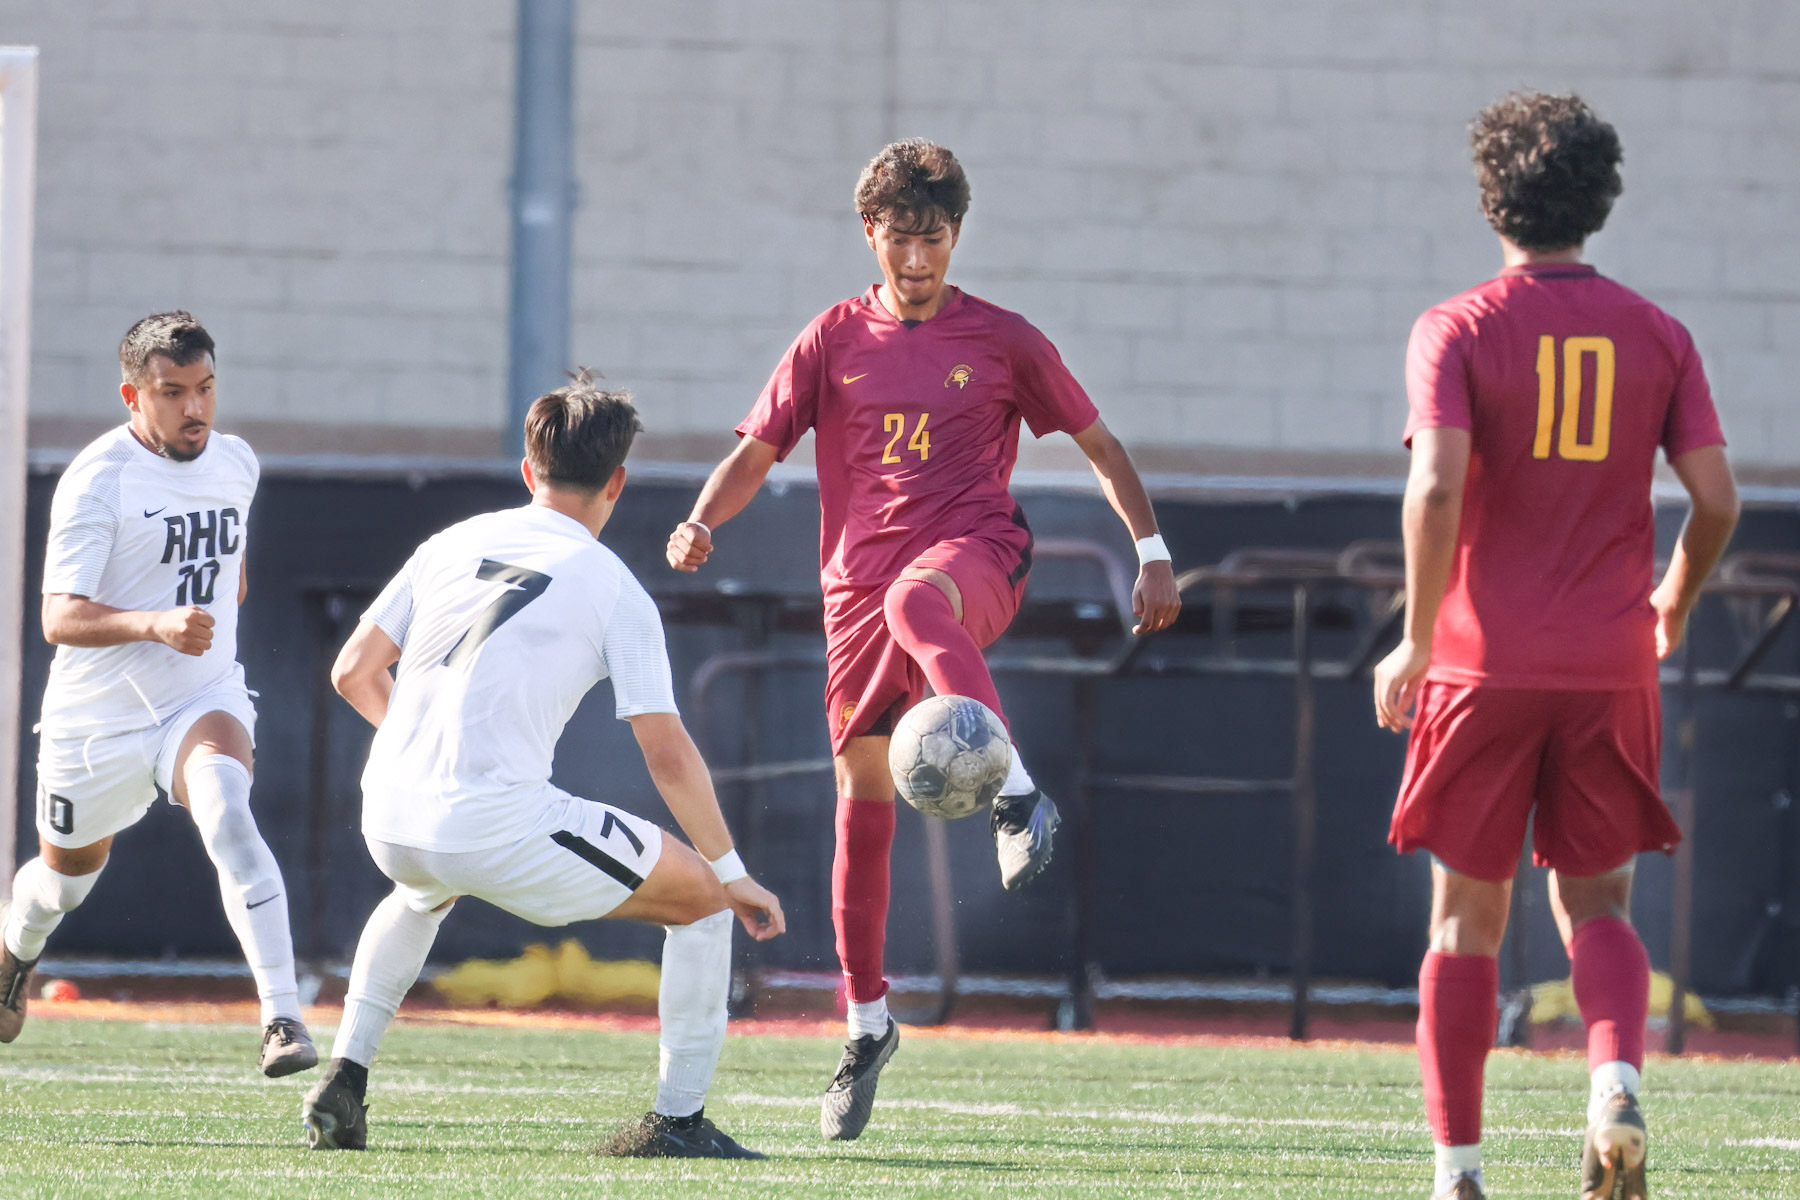 Eduardo Sanchez plays the ball during PCC's game on Wednesday (photo by Richard Quinton).